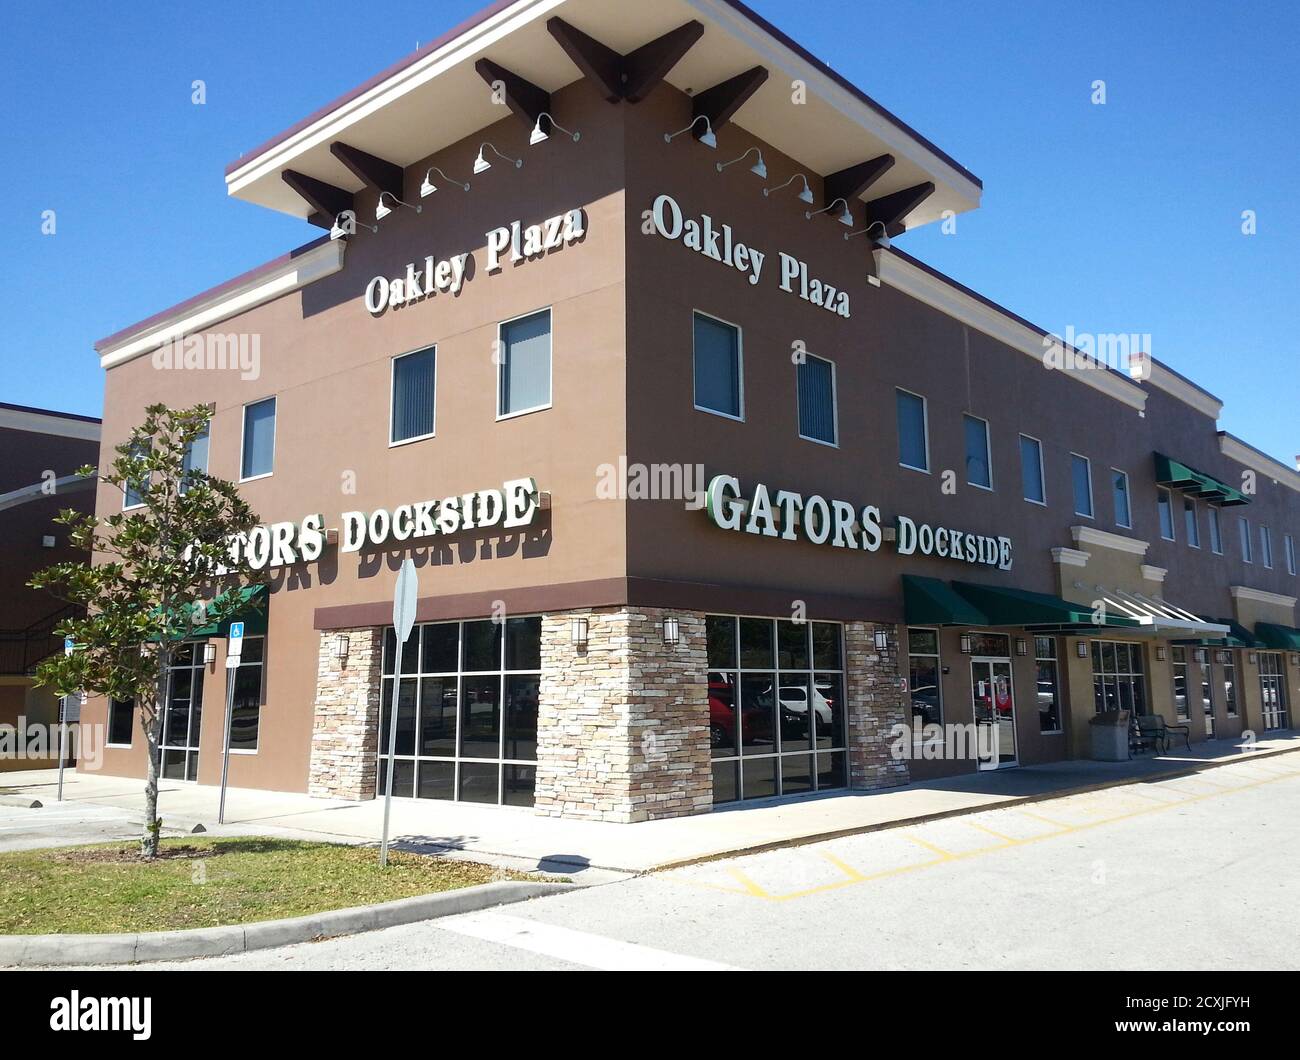 A Gator's Dockside restaurant, which is adding a surcharge onto diners'  bills for the Affordable Care Act, popularly known as Obamacare, is seen in  Clermont, Florida February 28, 2014. Diners at a